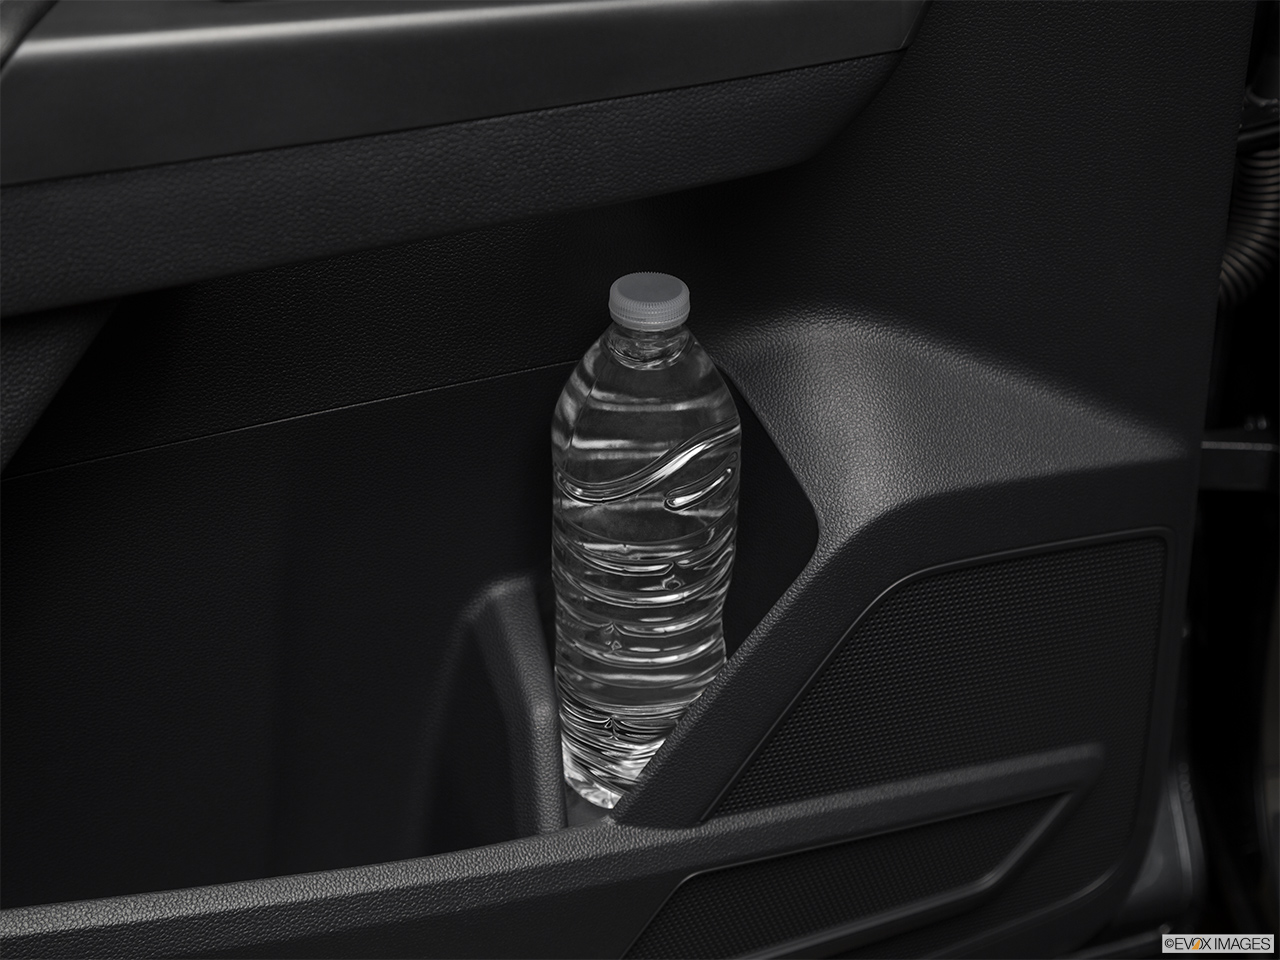 2018 Volkswagen Atlas SEL Premium Second row side cup holder with coffee prop, or second row door cup holder with water bottle. 